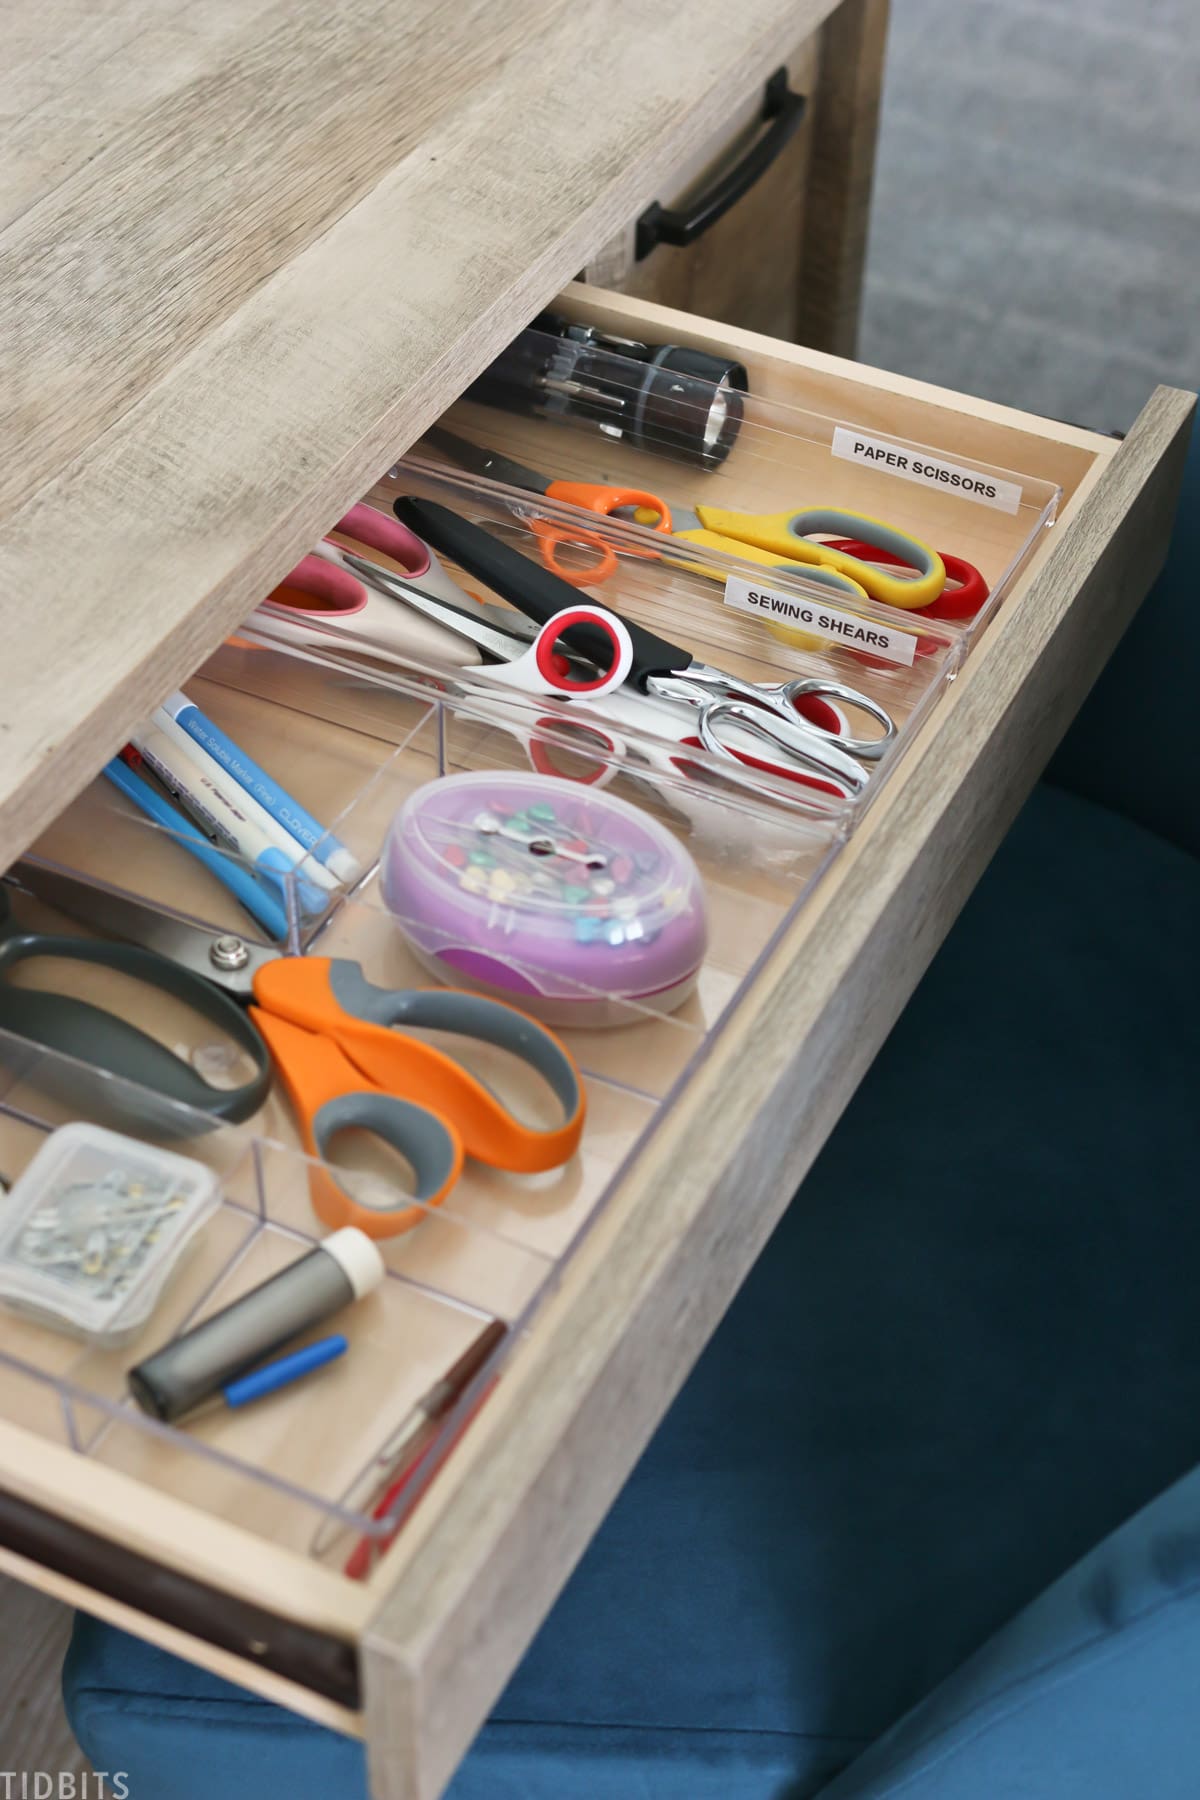 desk drawer is opened to show three containers organizing paper scissors, sewing shears, and sewing needles